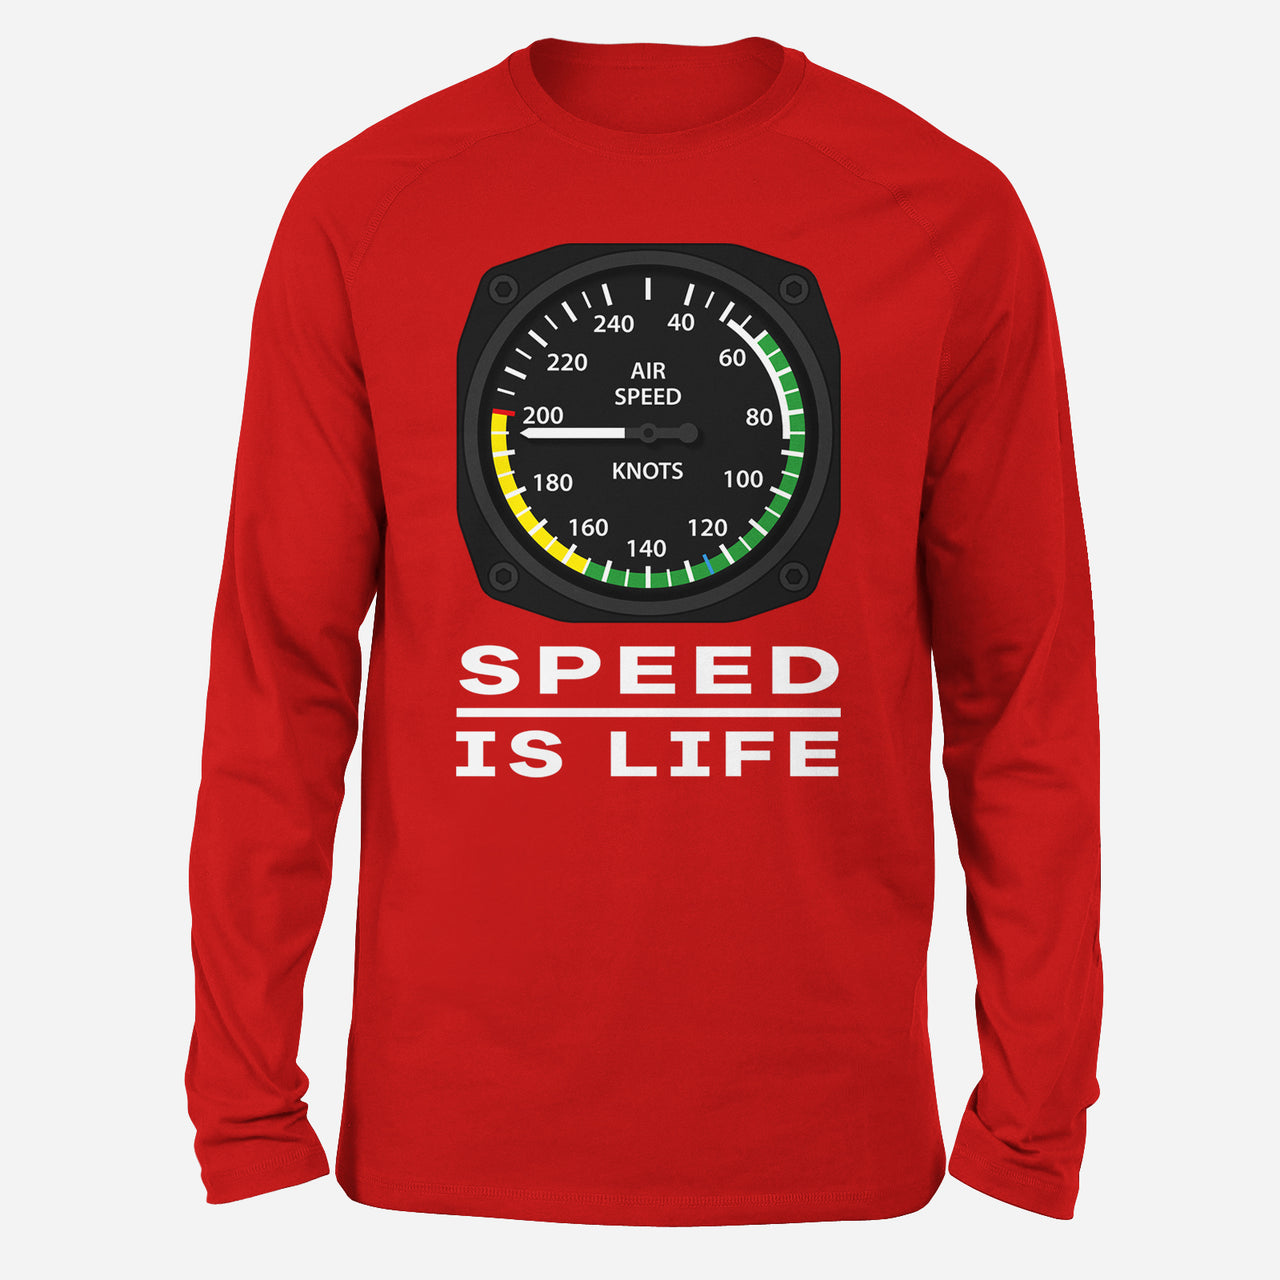 Speed Is Life Designed Long-Sleeve T-Shirts